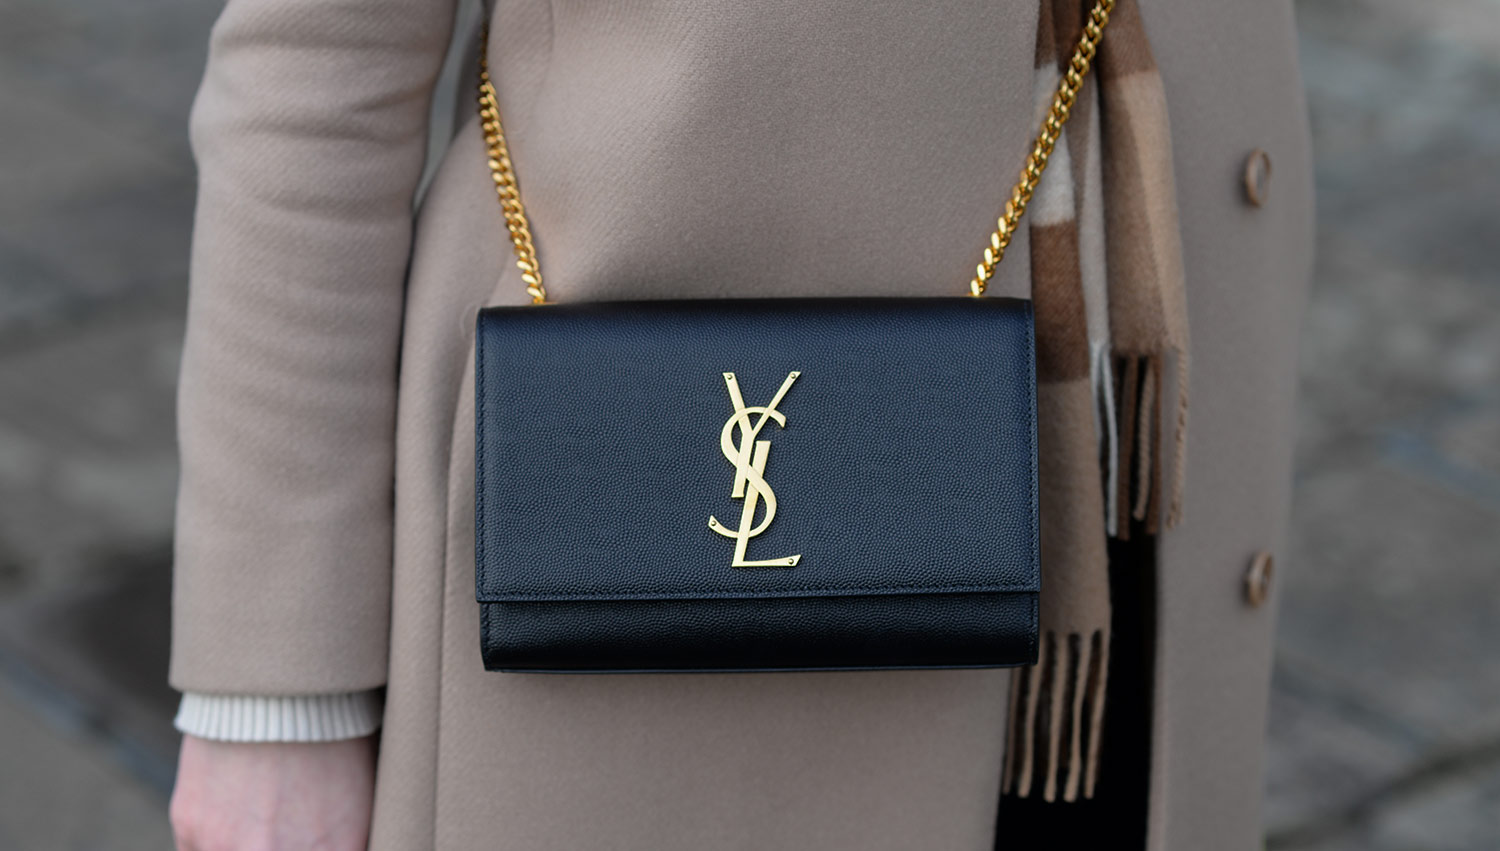 YSL Envelope Bag Review  BEST LARGE LUXURY BAG FOR THE MONEY? 